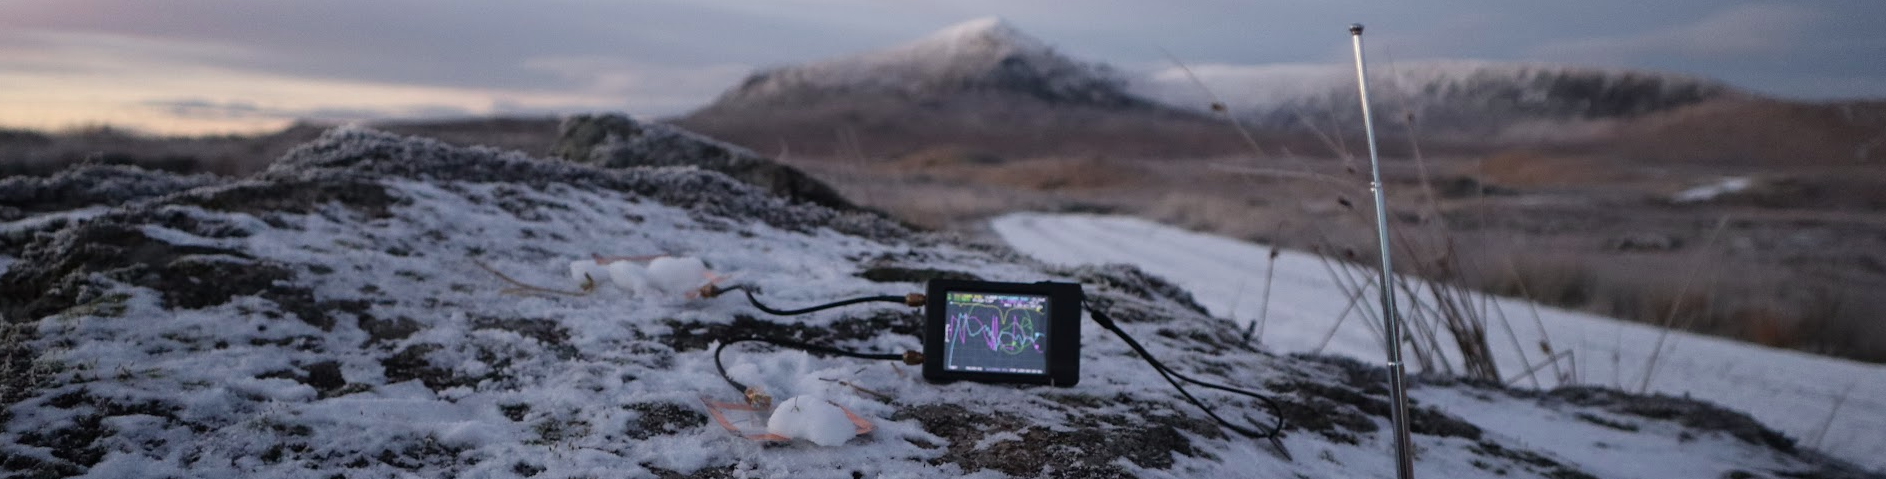 Electronic devices in a snowy mountainous environment